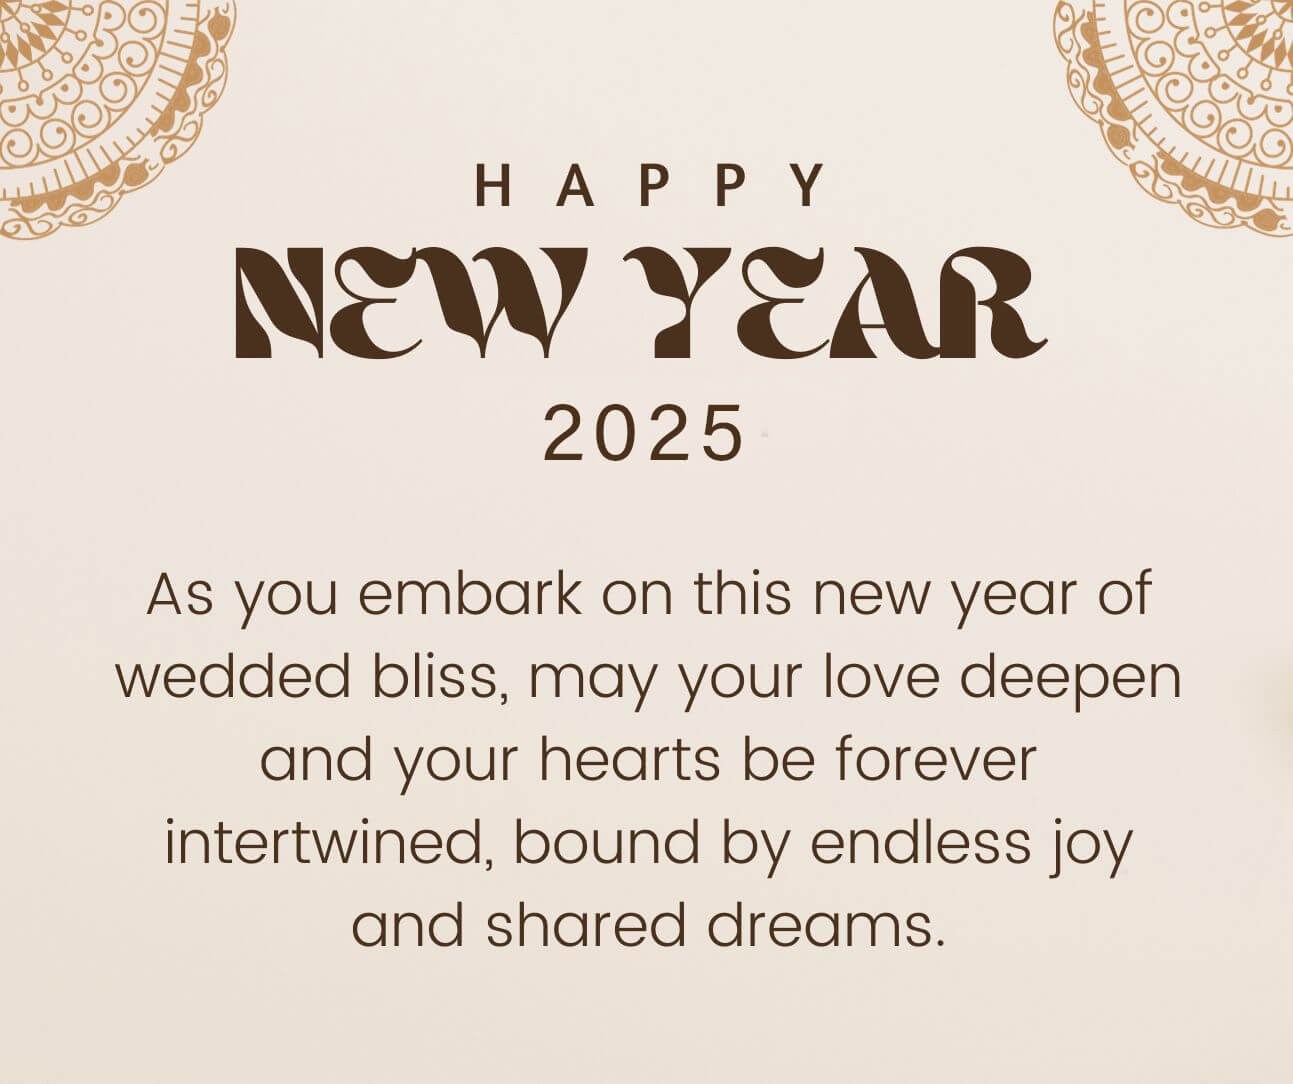 New Year Wishes For Newly Married Couple 2025